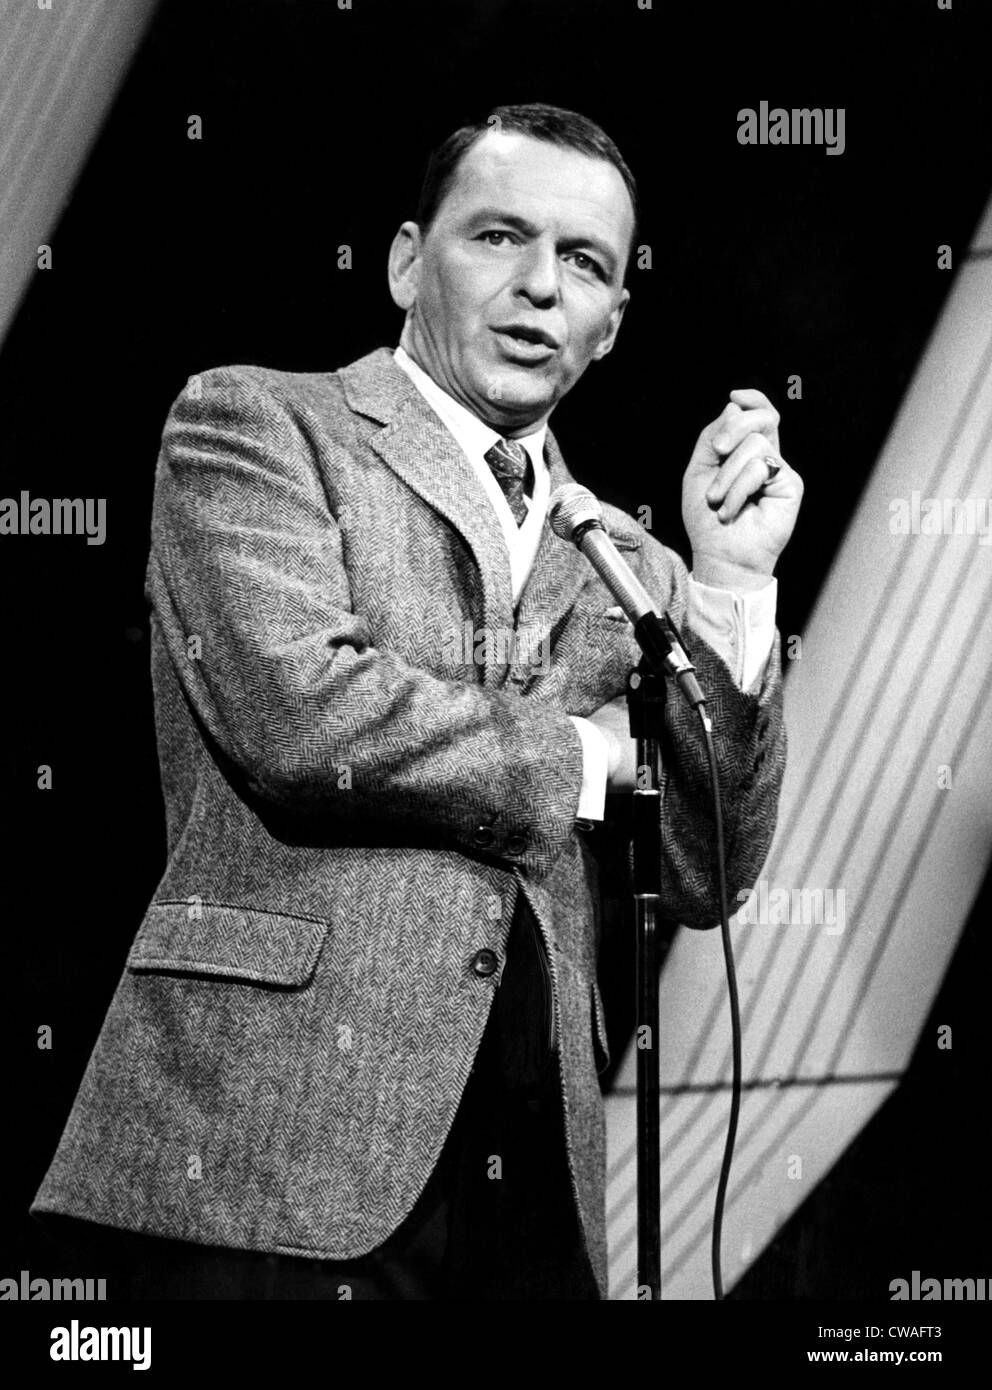 Frank sinatra 1966 Black and White Stock Photos & Images - Alamy